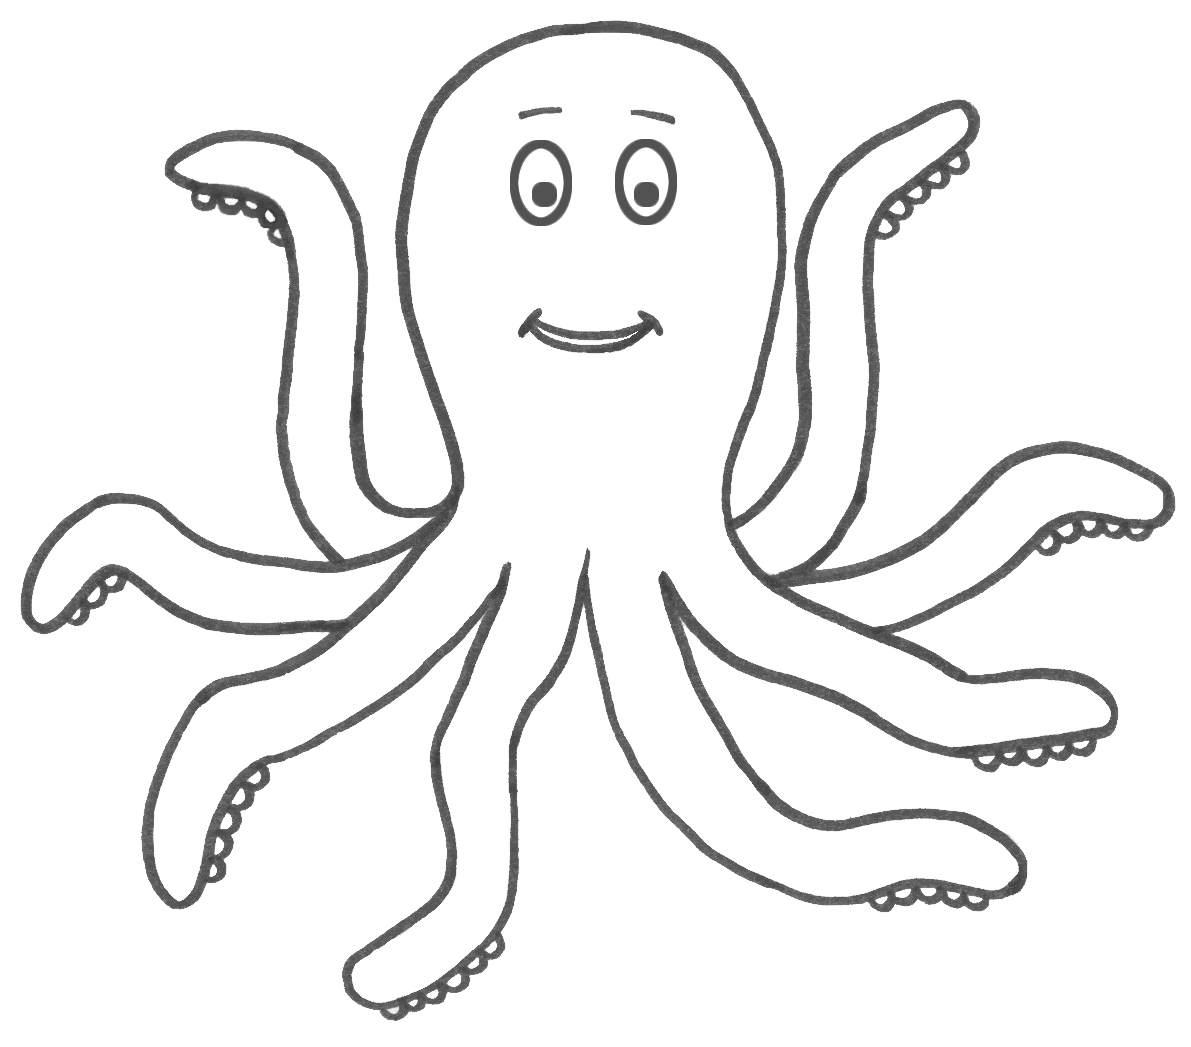 How To Draw An Octopus For Kids, Step by Step, Drawing Guide, by Dawn -  DragoArt